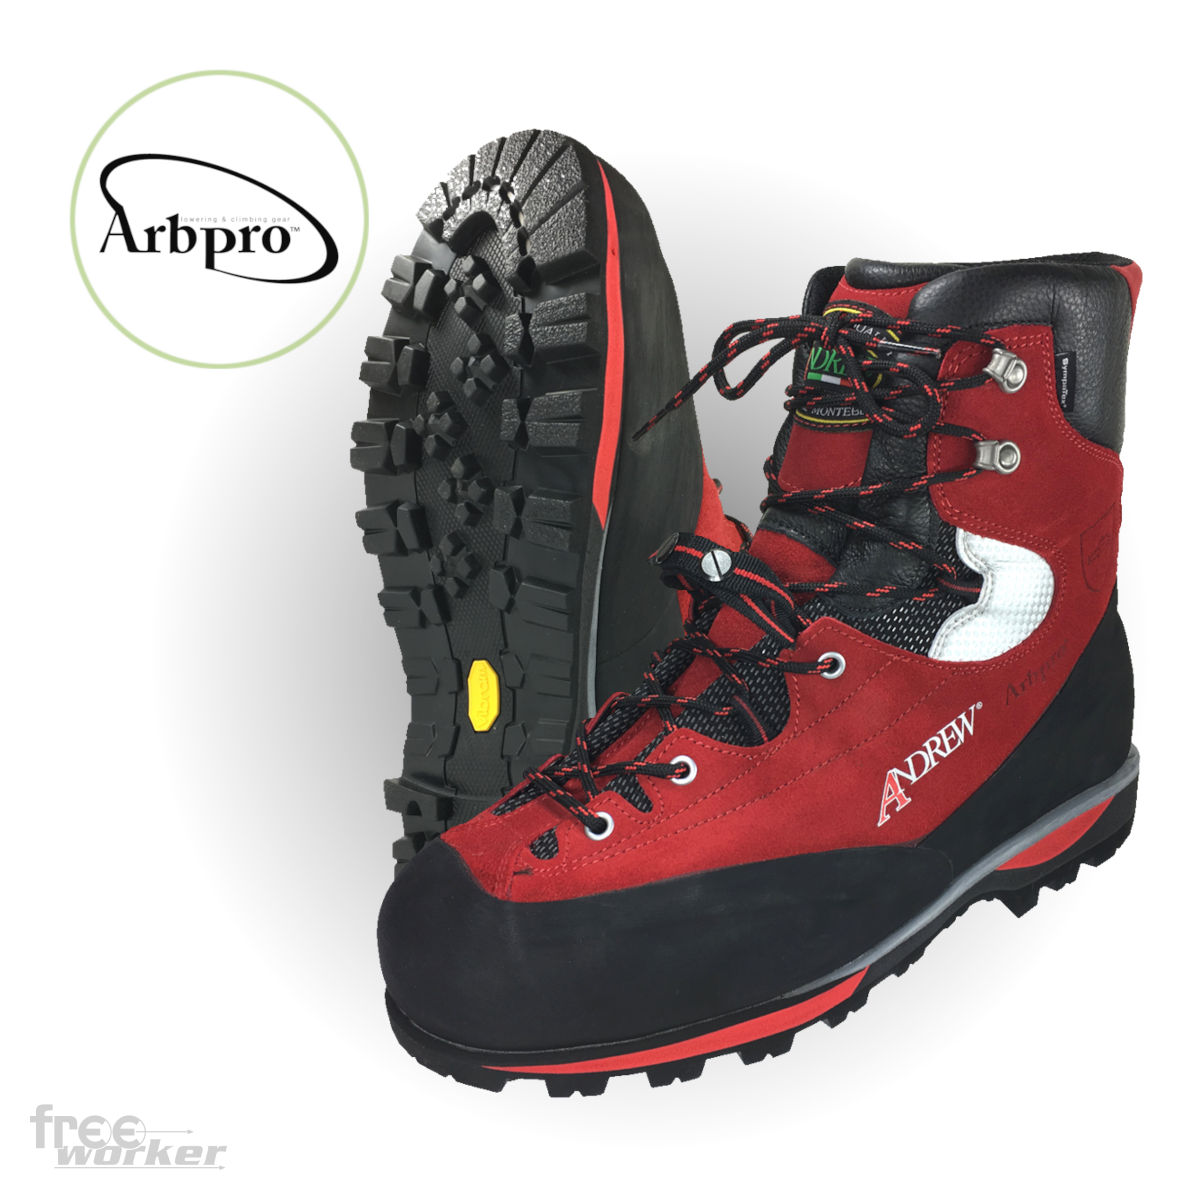 Chainsaw protection shoe for tree care: Cervino Wood EZloop